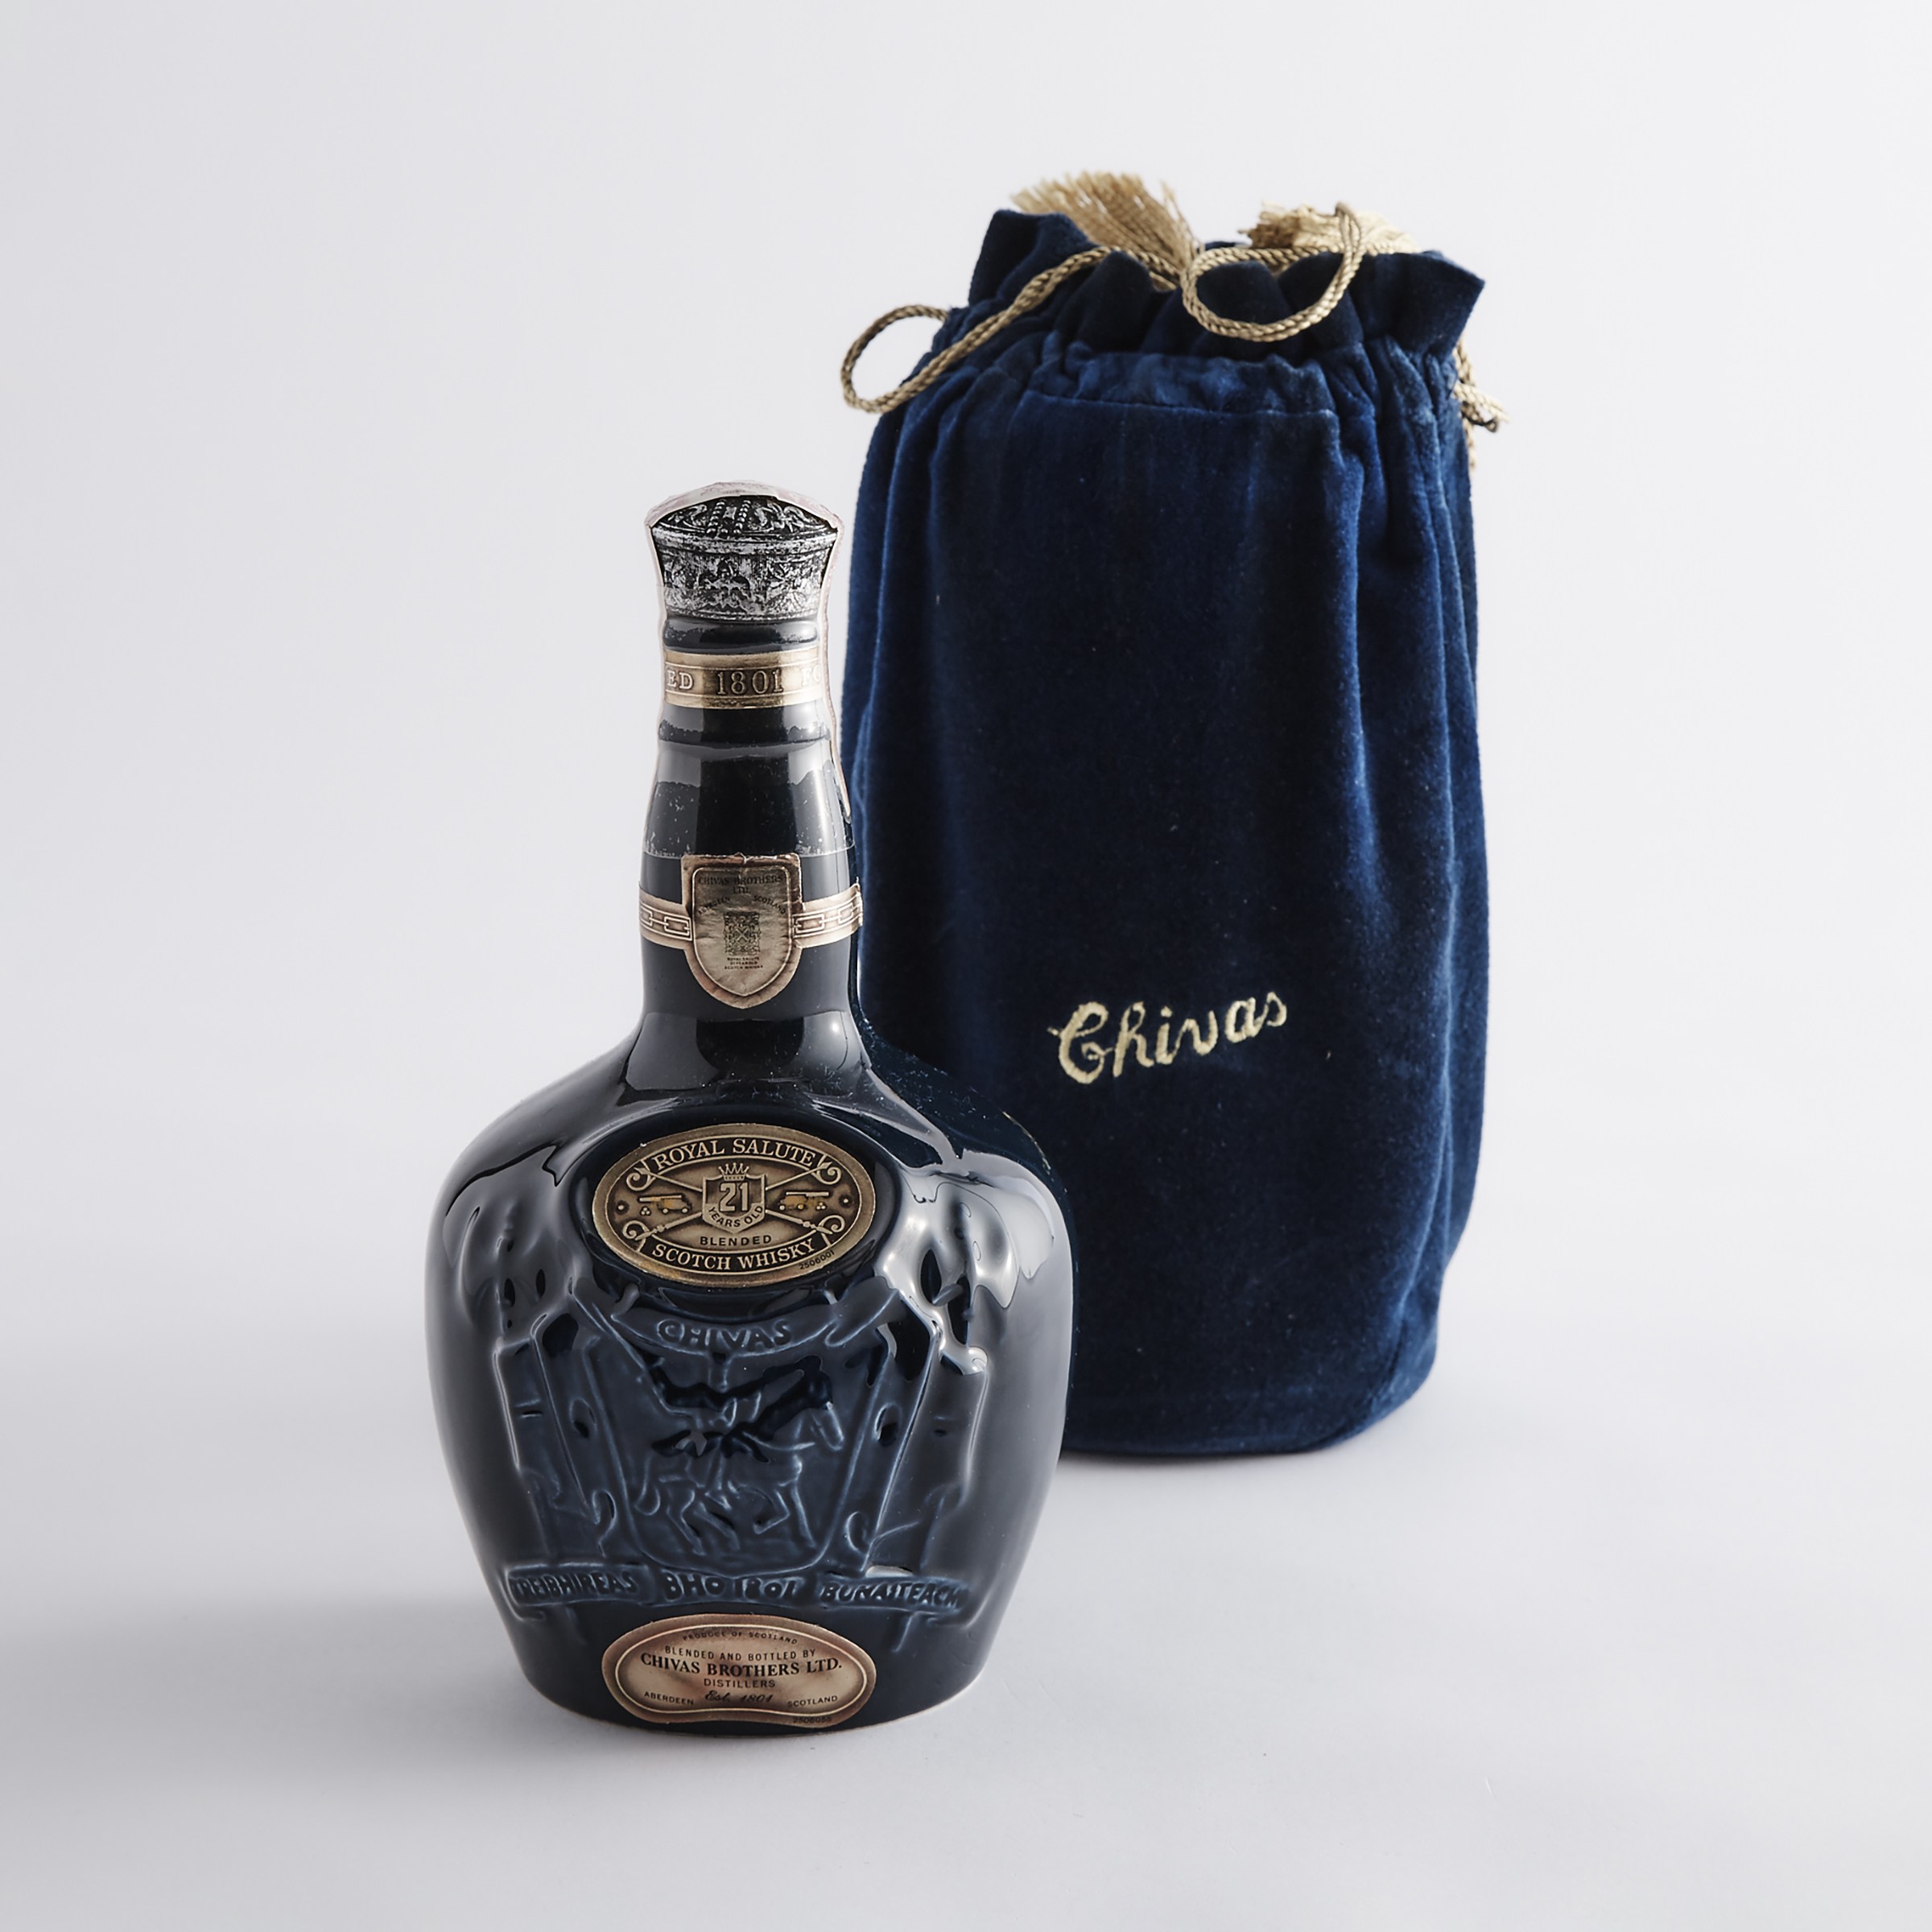 CHIVAS ROYAL SALUTE BLENDED SCOTCH WHISKY 21 YEARS (ONE 70 CL)